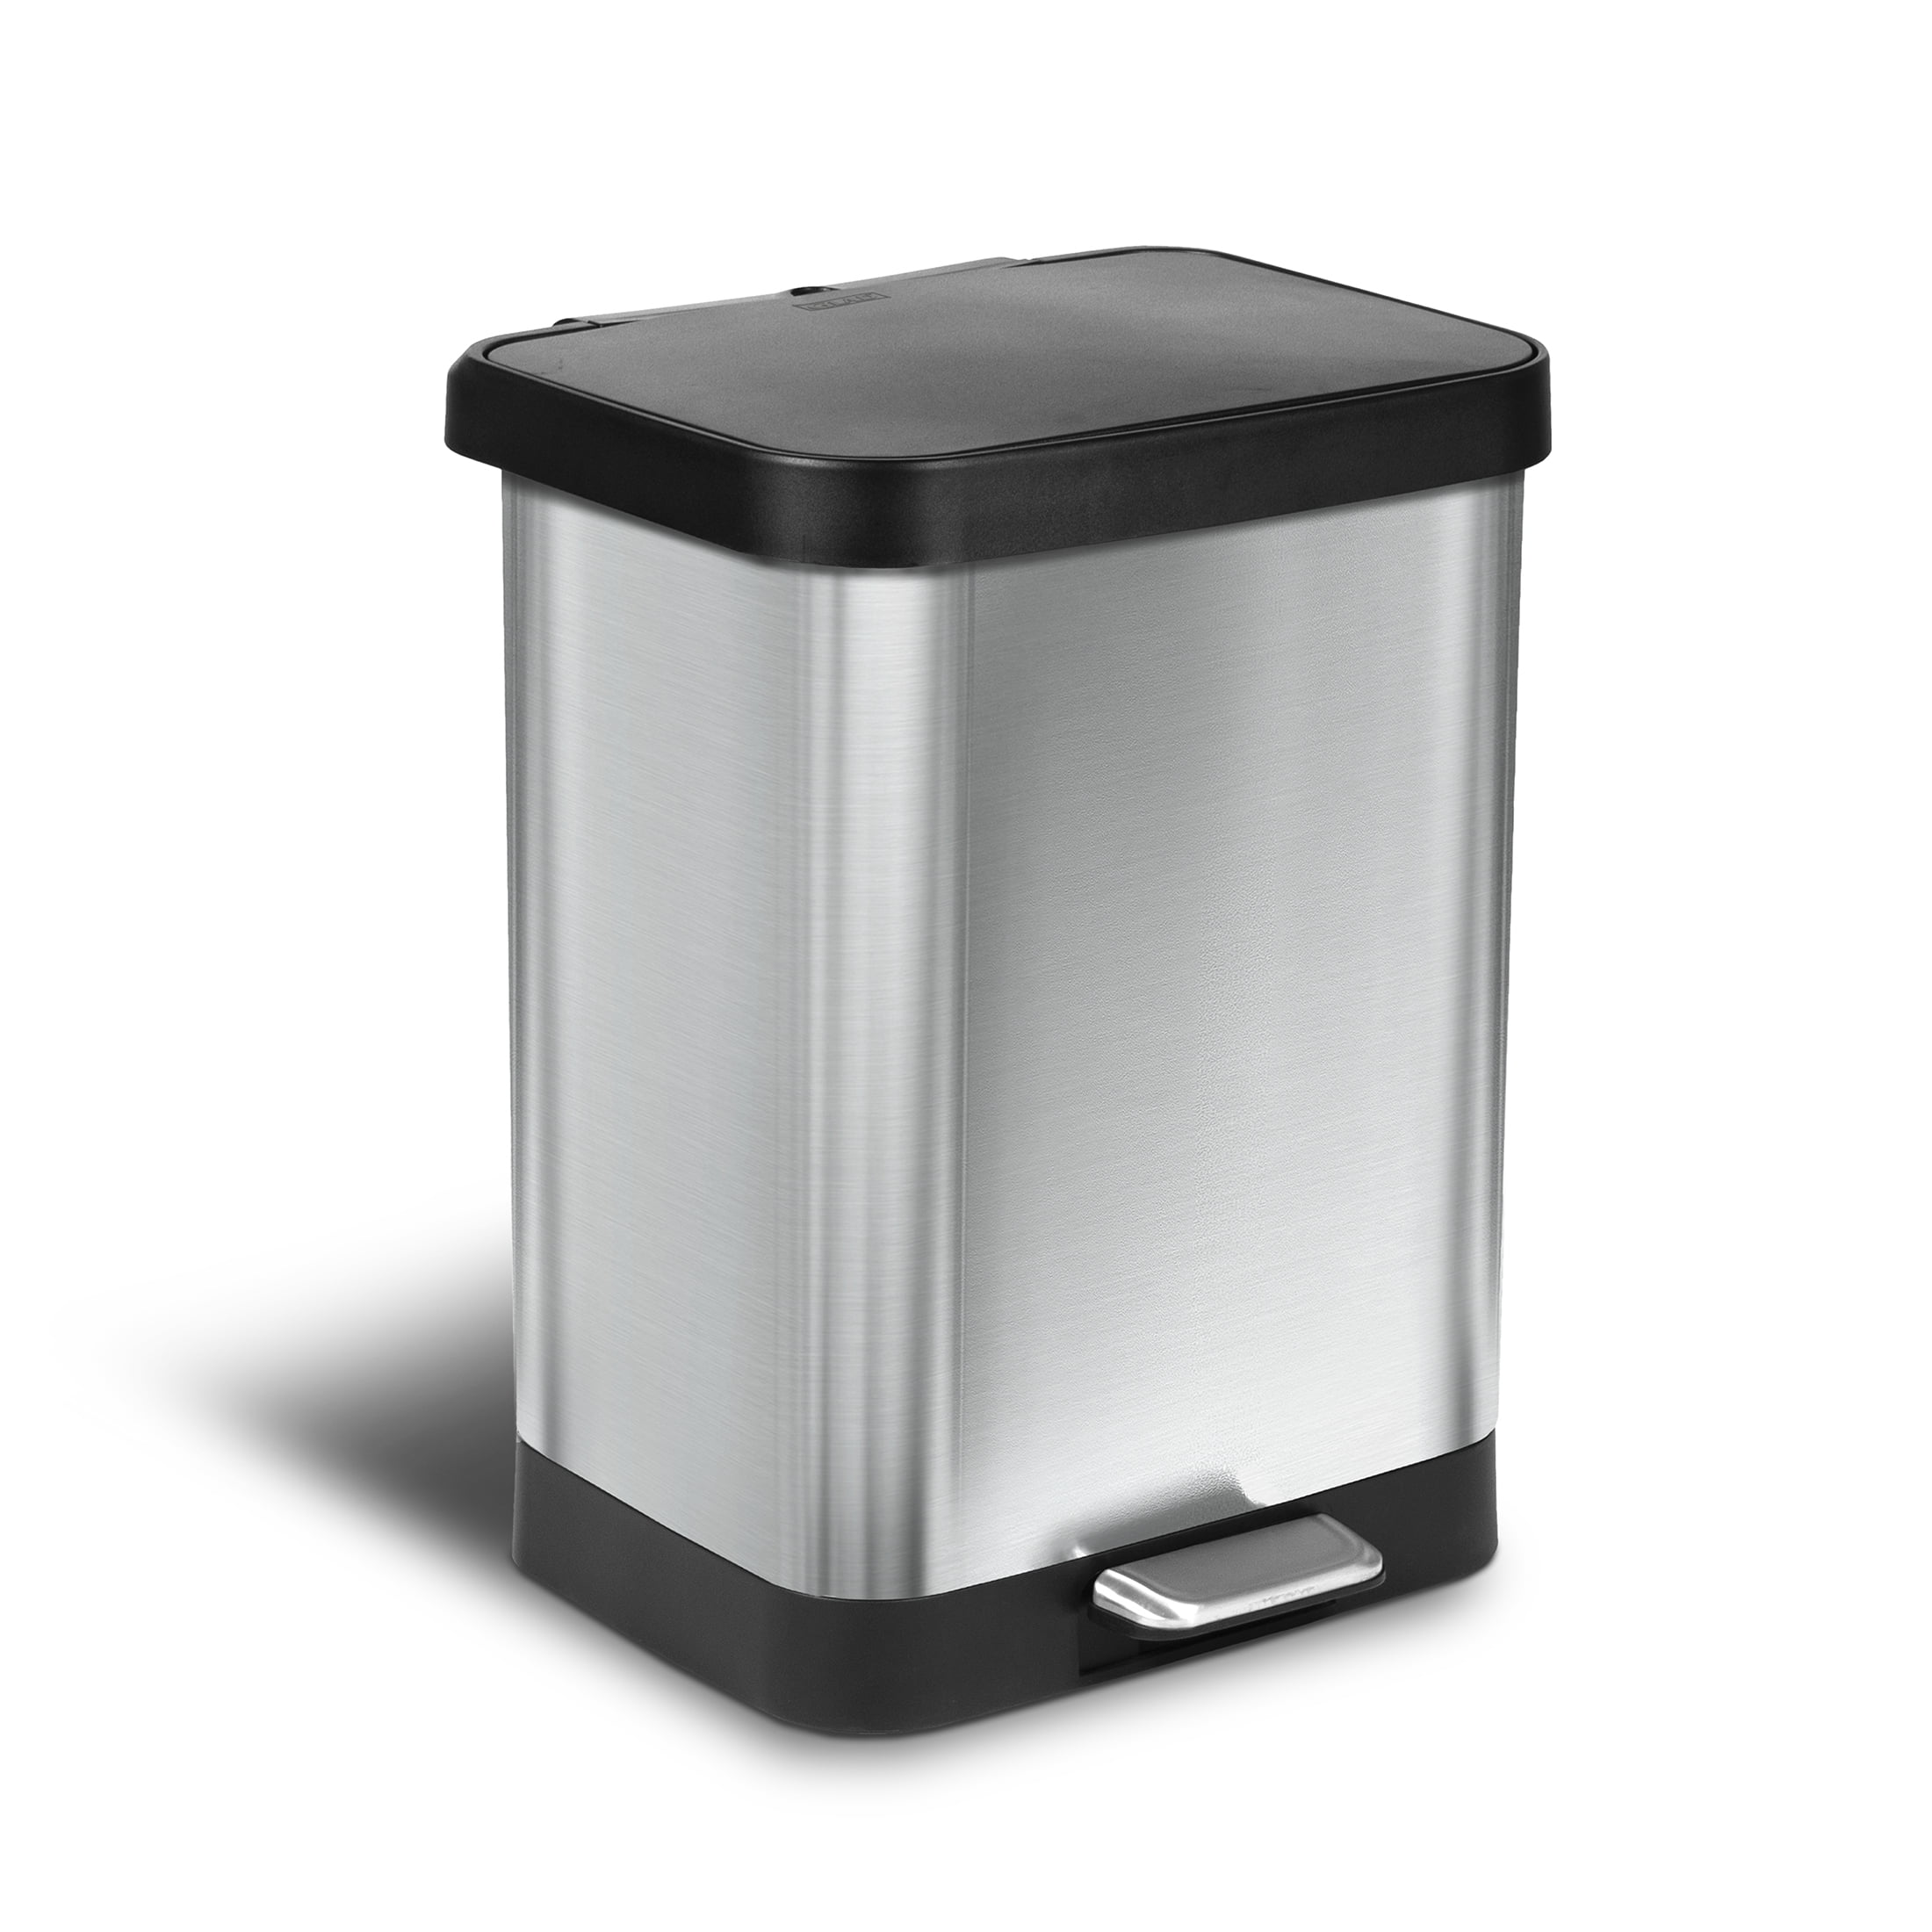 SW 13 gal. Stainless Steel Step-On Trash Can D-Shaped